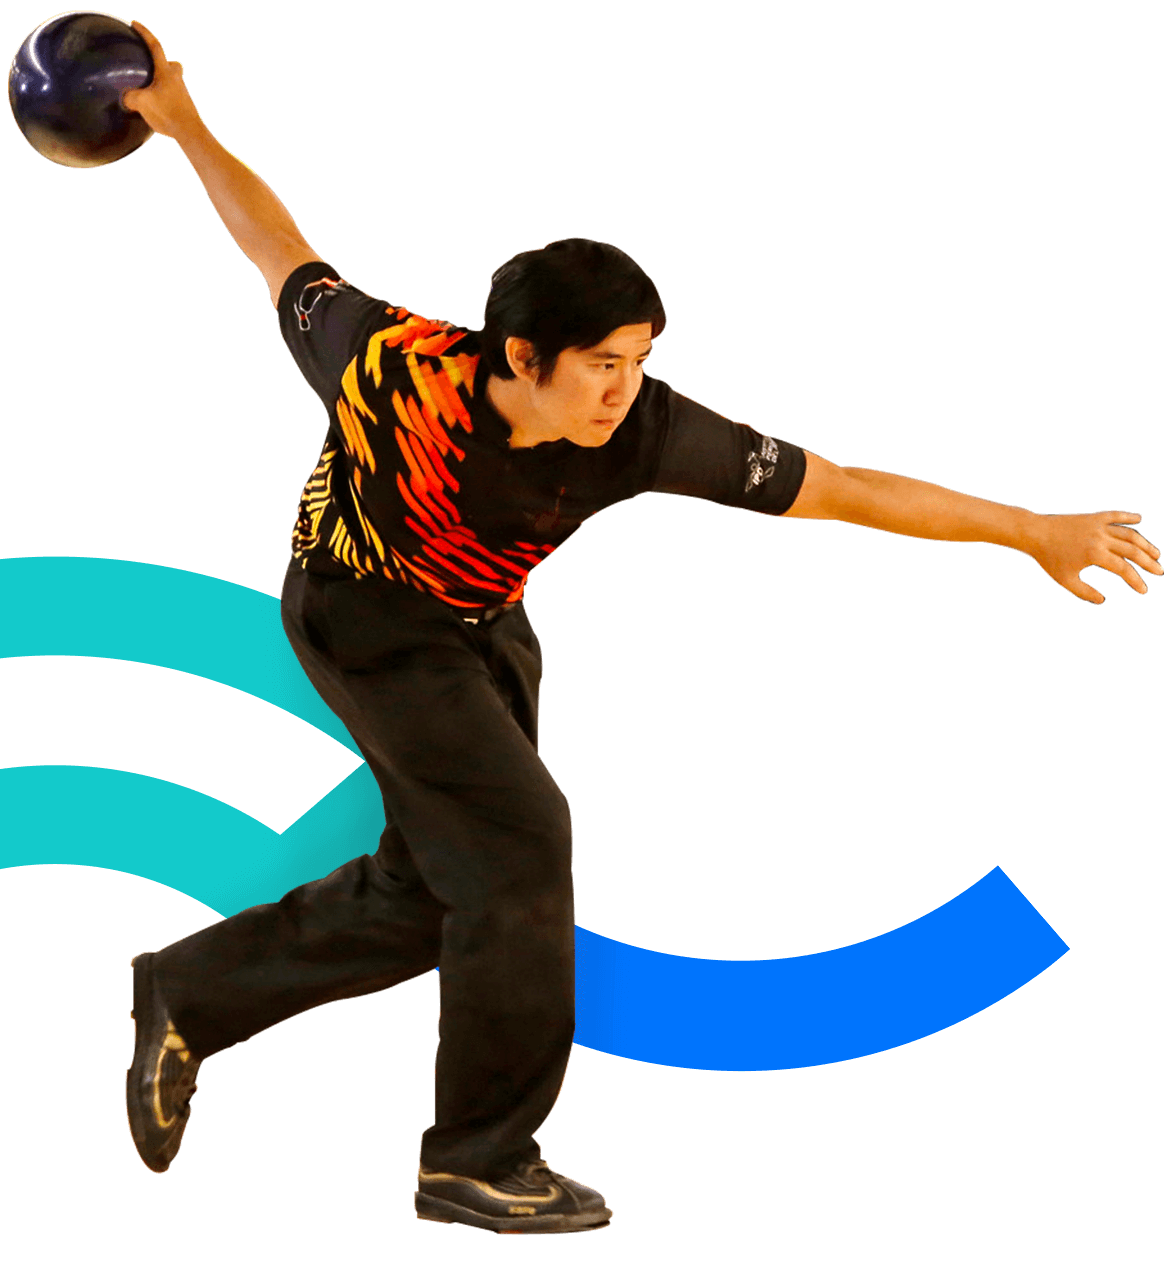 In the picture, a male player is tilting holding a bowling ball. He is throwing it.